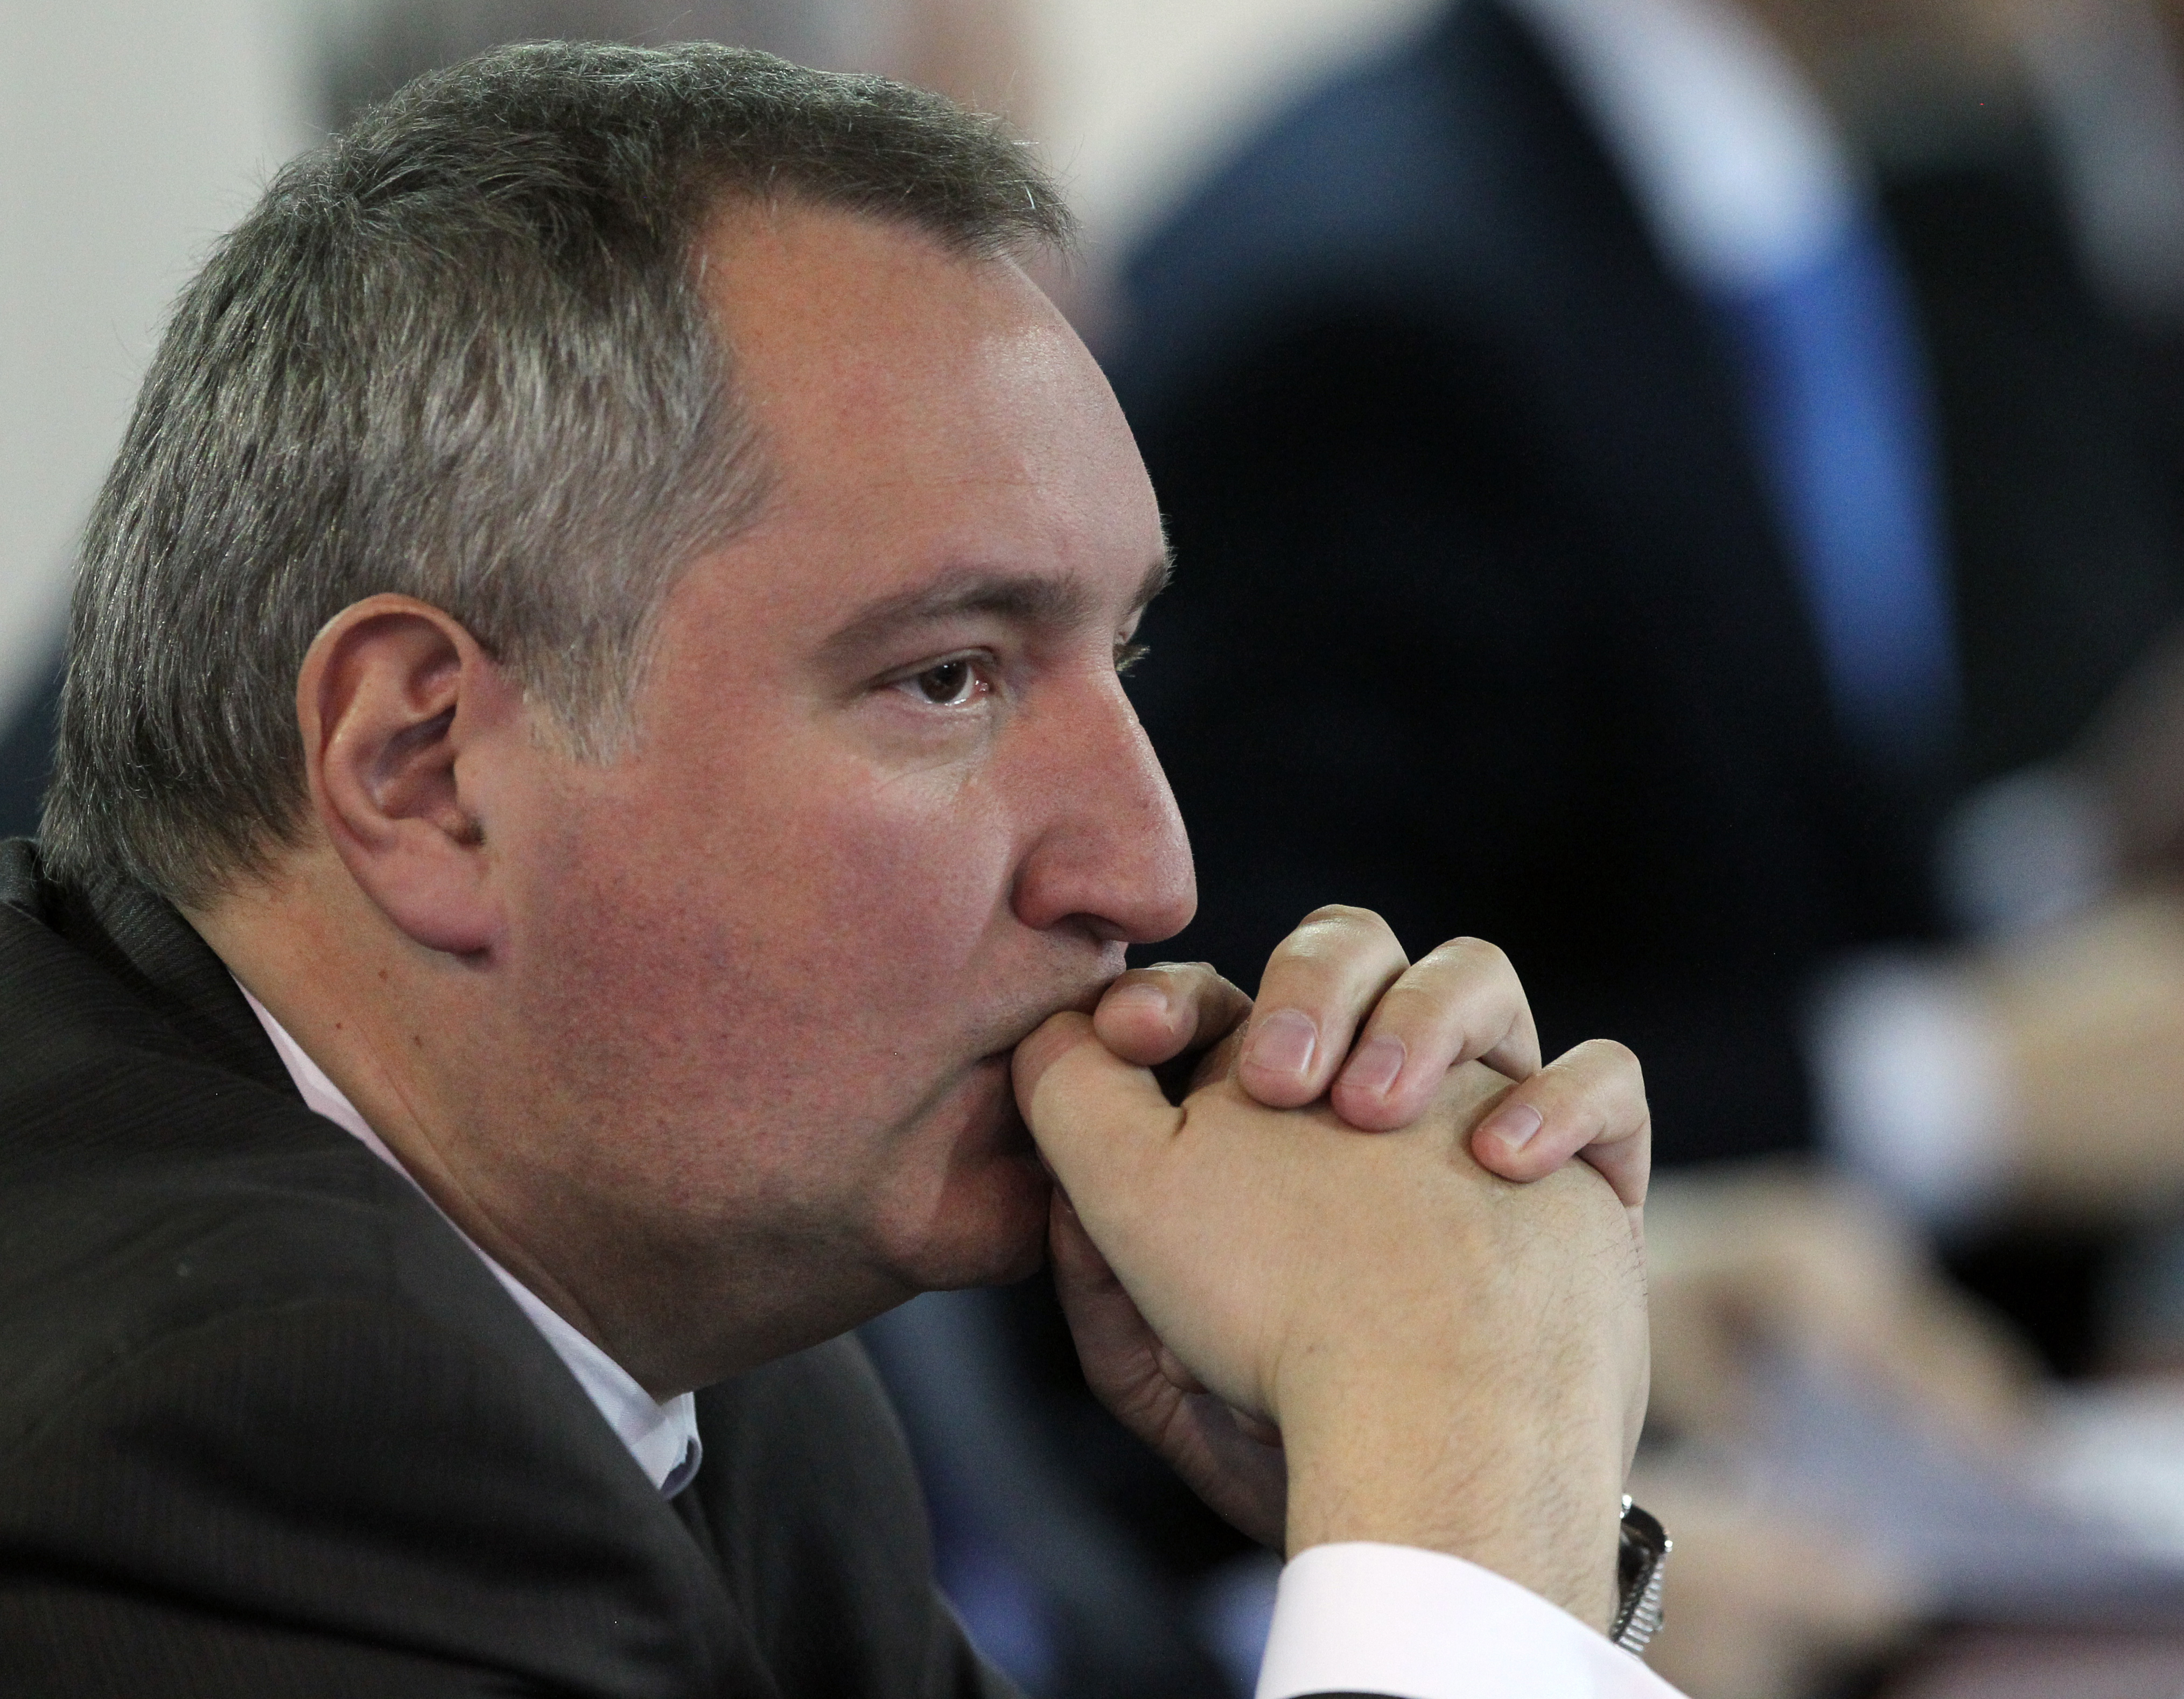 Russian Deputy Prime Minister Dmitry Rogozin attends a meeting at the KBP Instrument Bureau, a high-precious weapon plant in Tula, 160 km. south of Moscow, on Jan. 20, 2014 (Sasha Mordovets—Getty Images)